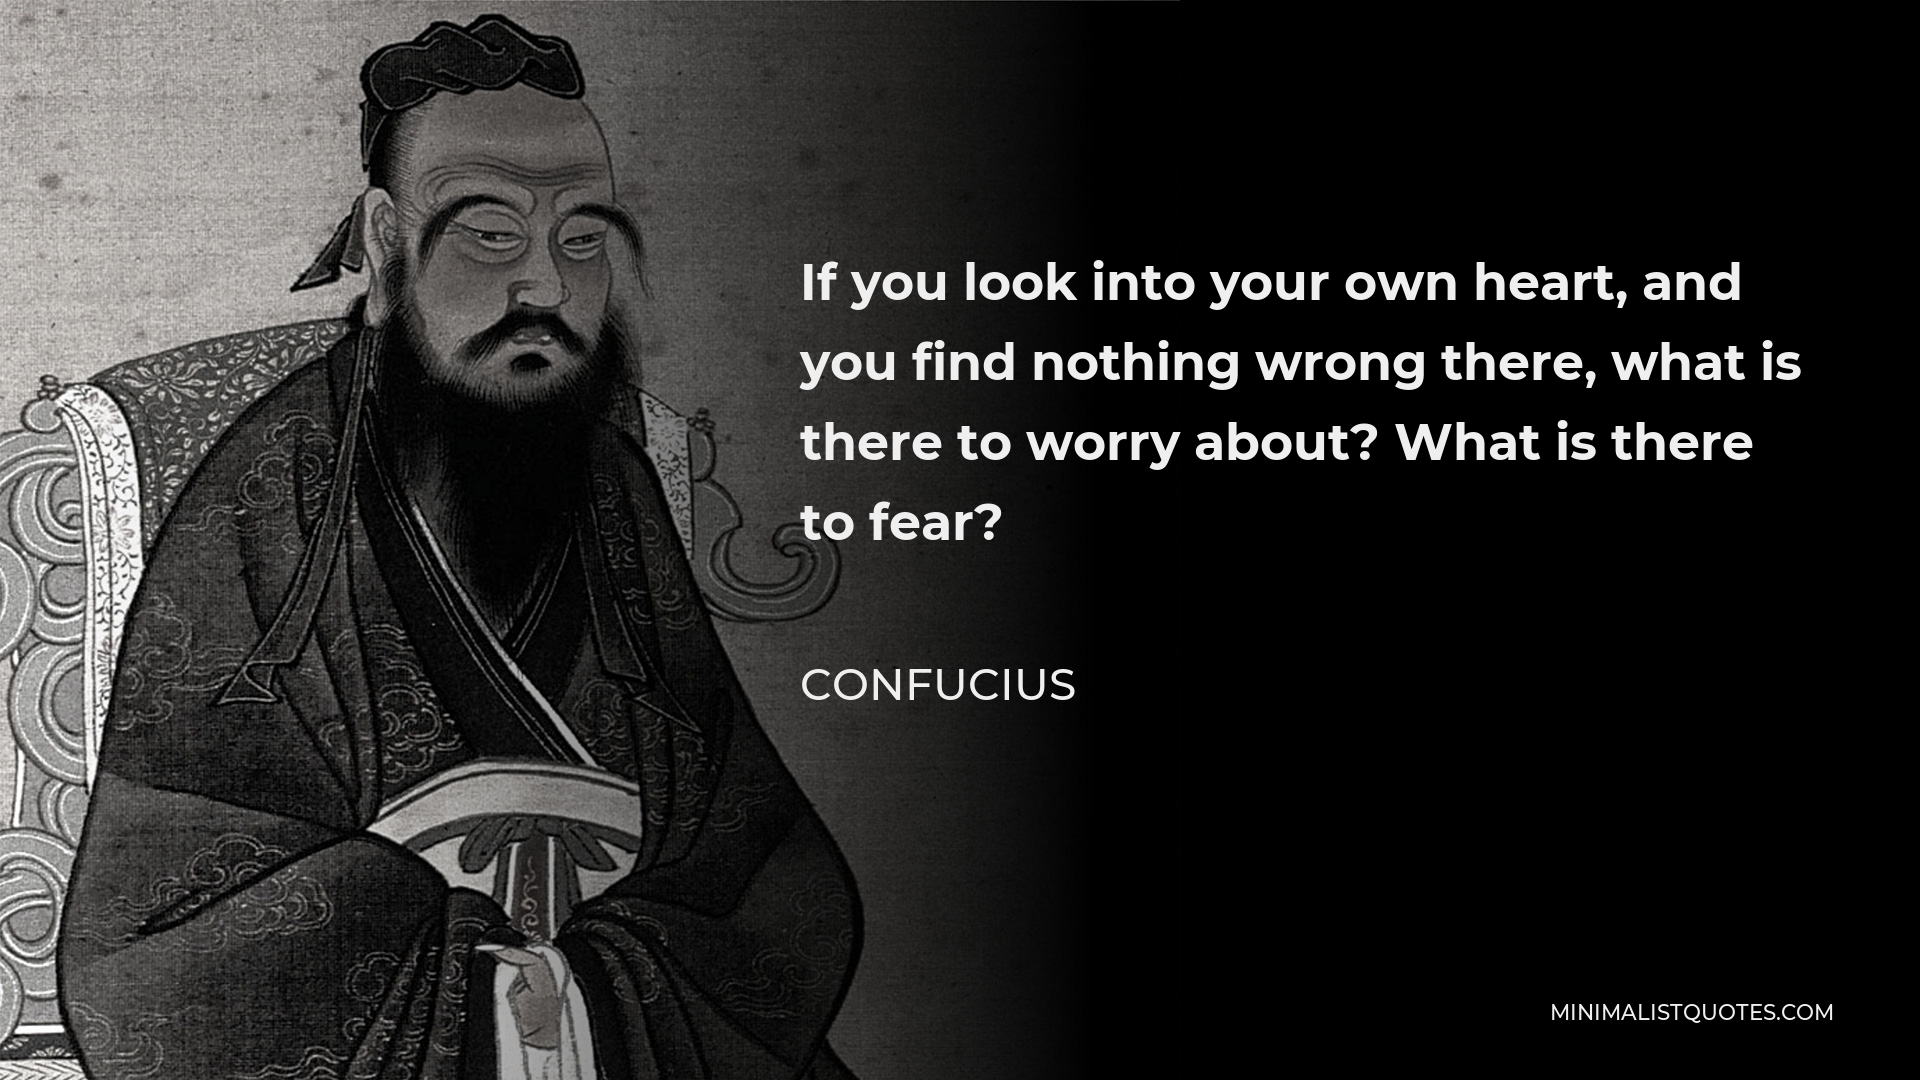 Confucius Quote - If you look into your own heart, and you find nothing wrong there, what is there to worry about? What is there to fear?